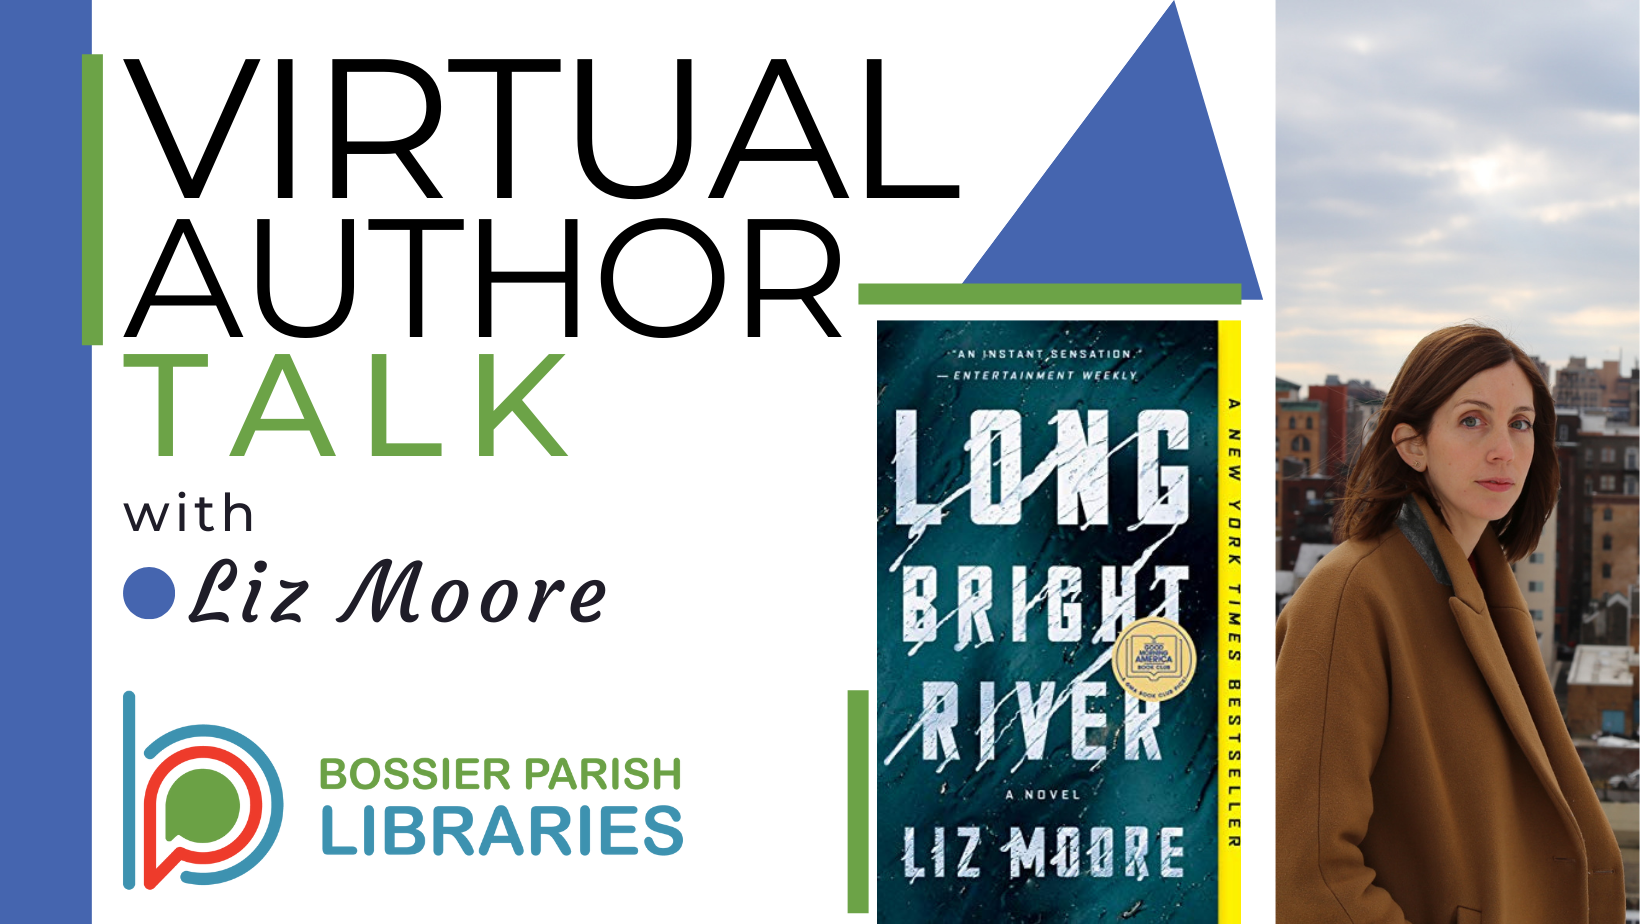 Virtual Author Talk with Liz Moore